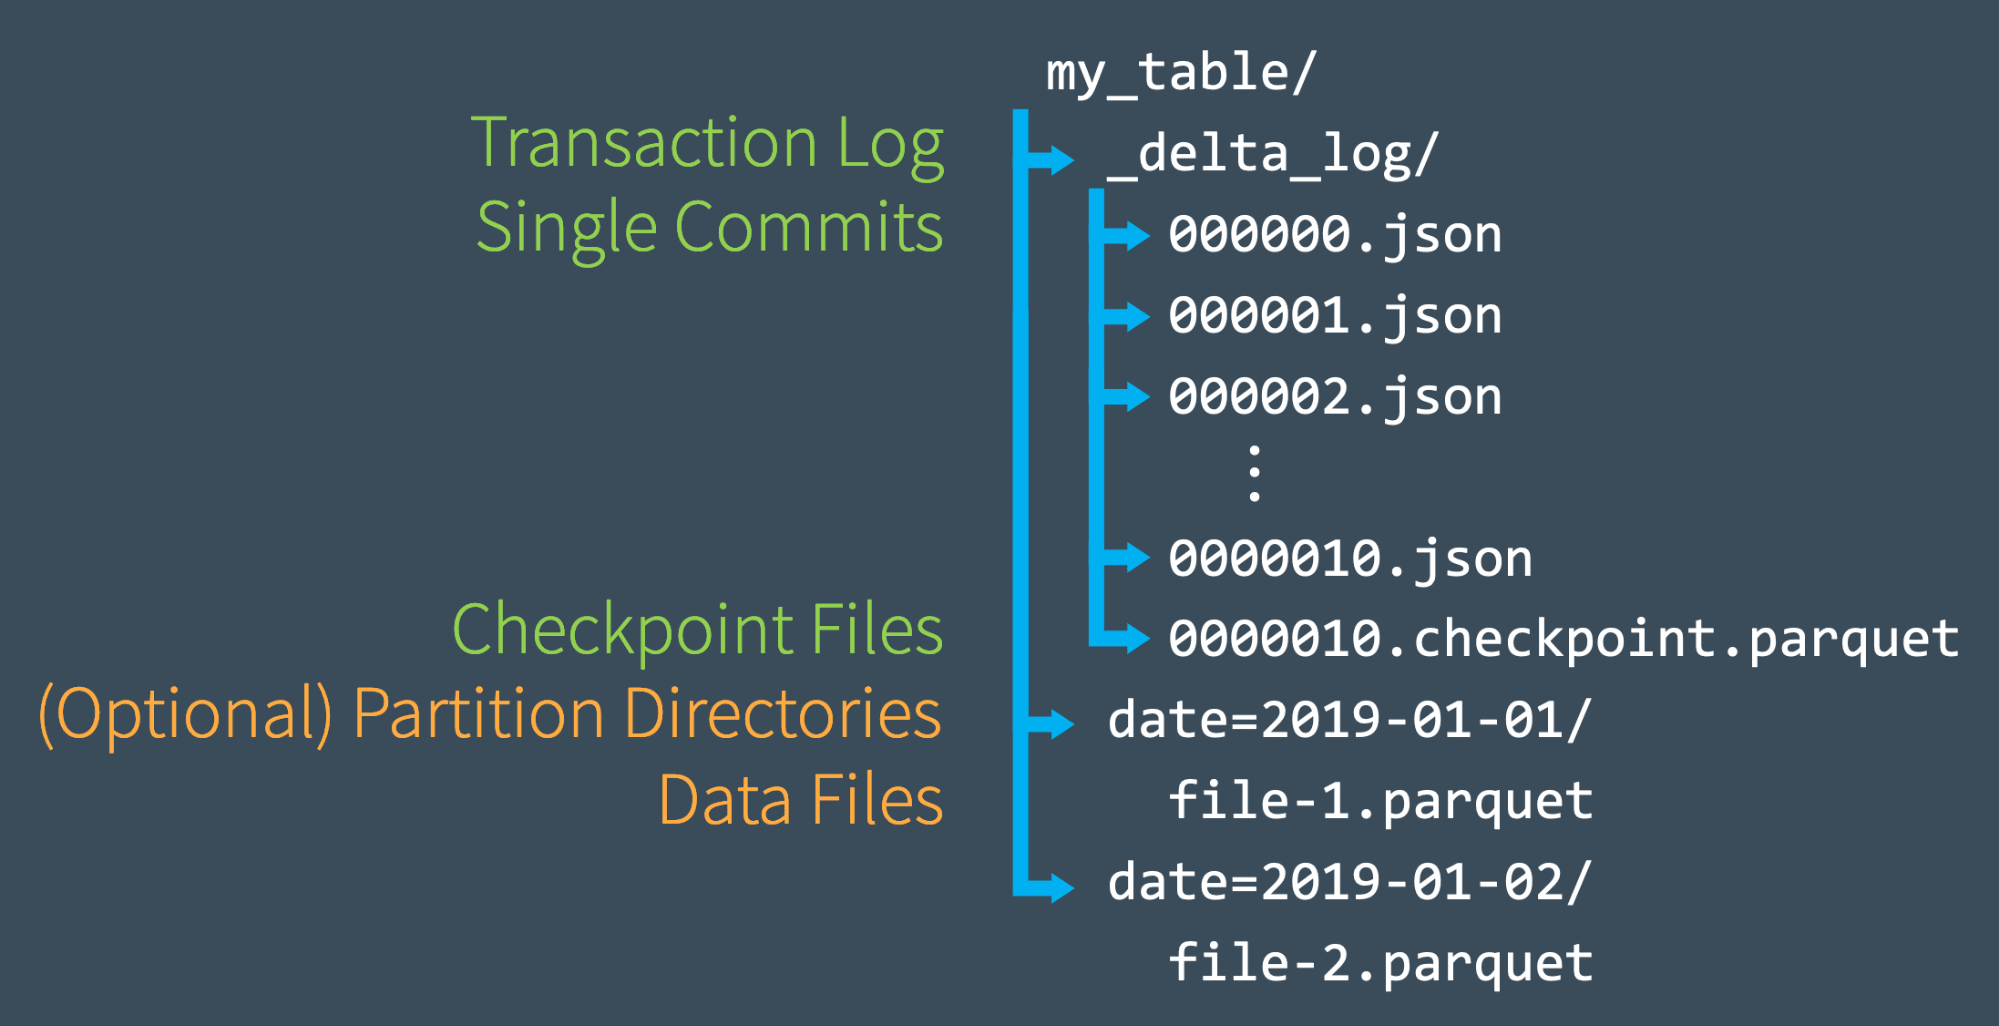 Diagram illustrating the Delta Lake Transaction Log file structure, including partition directories.